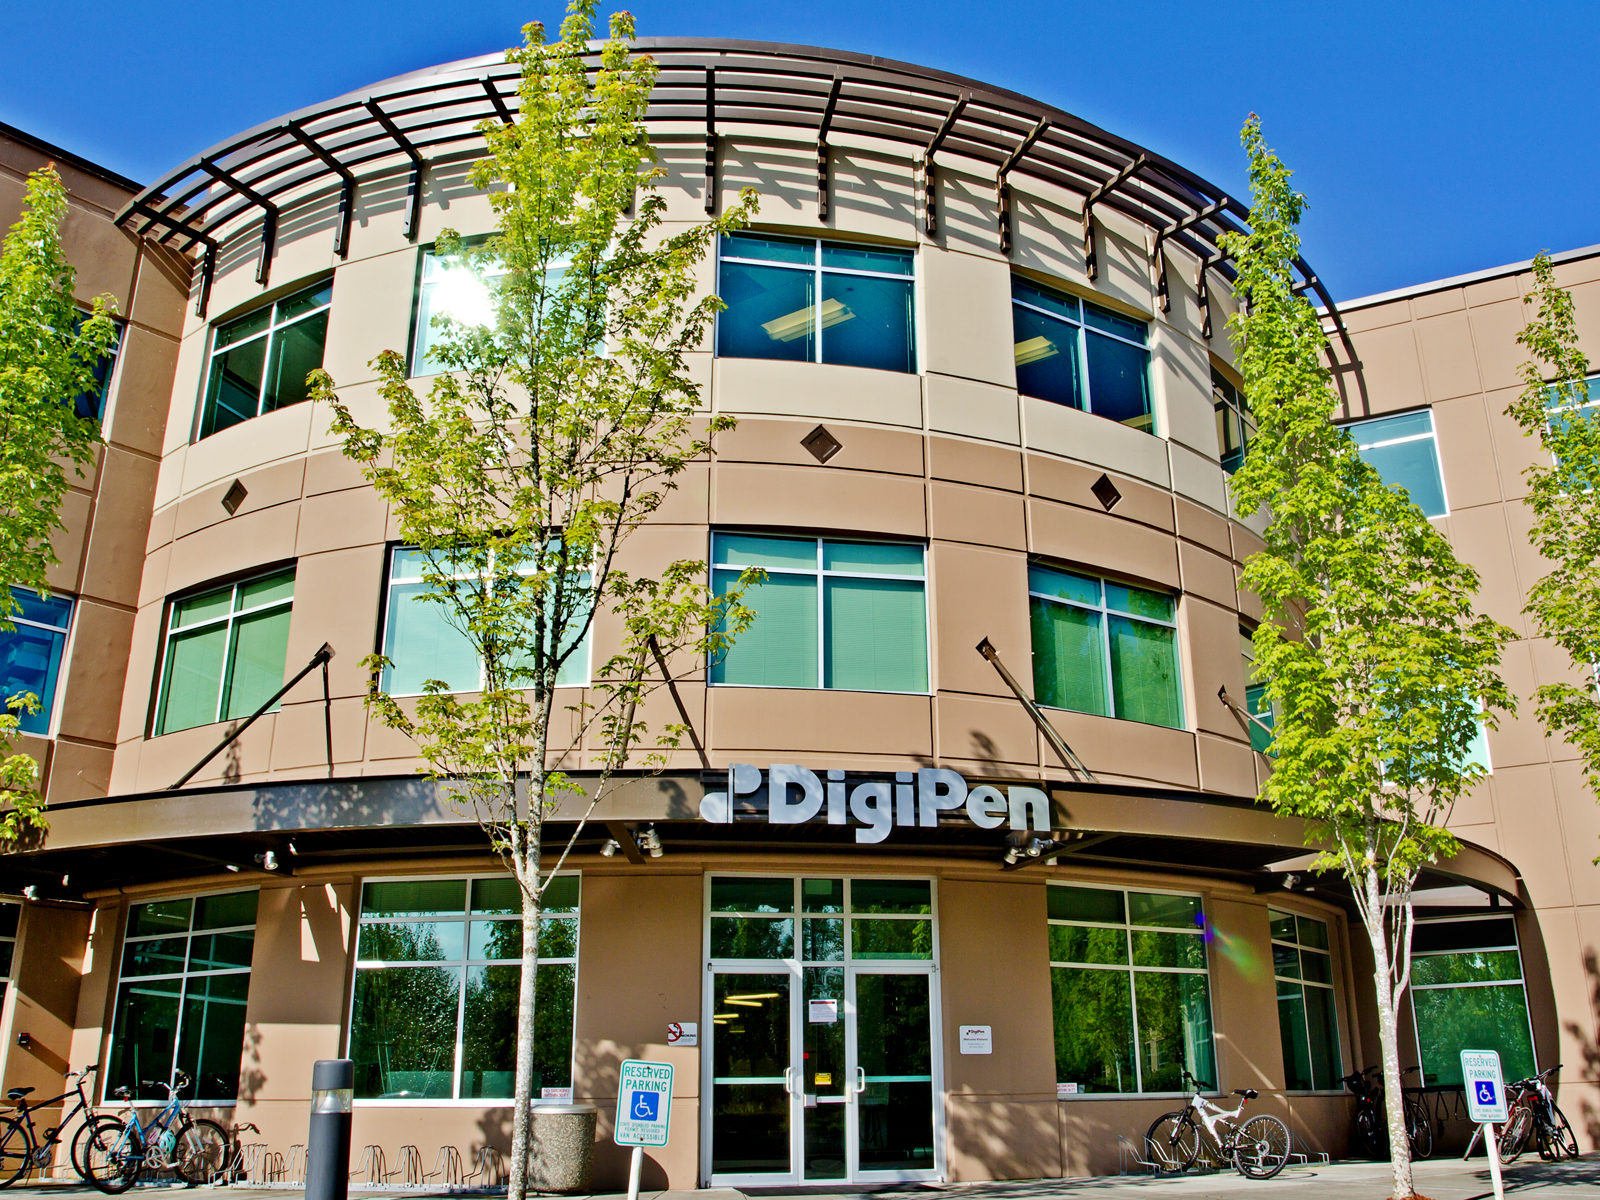 Looking up at the DigiPen building on a sunny day